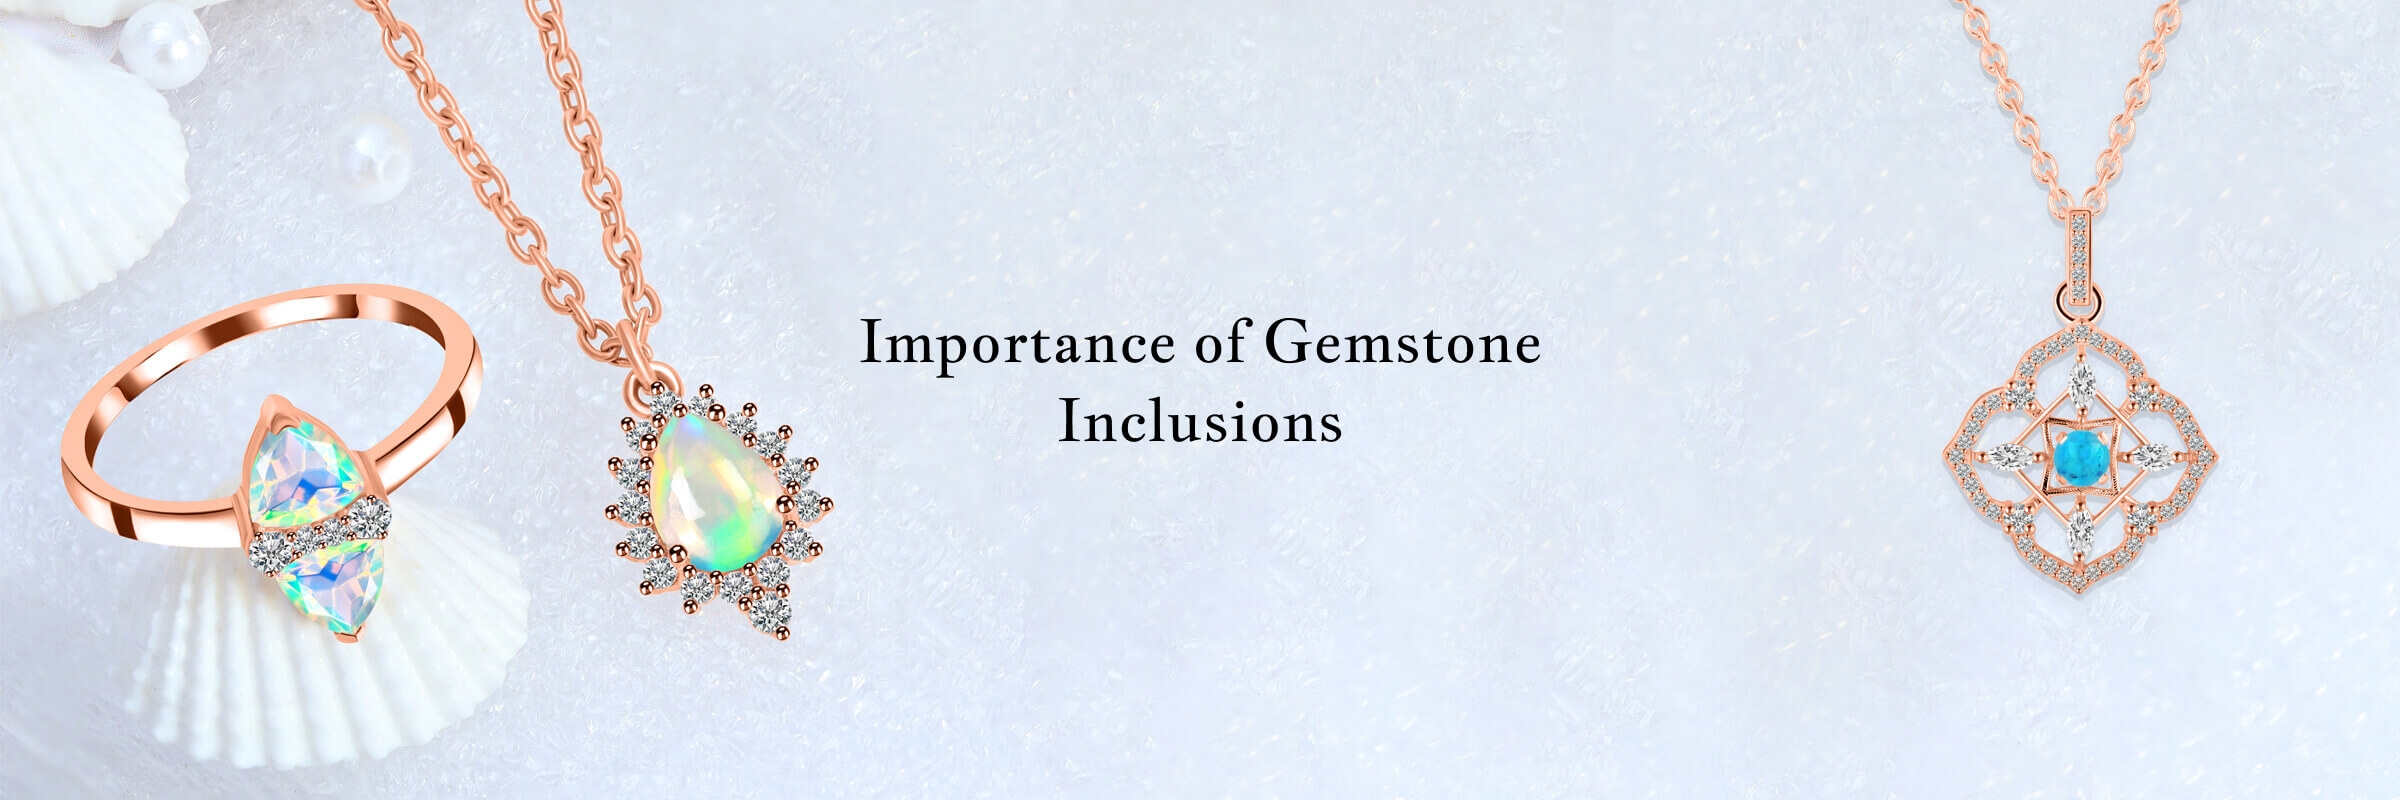 Gemstone Inclusions Important